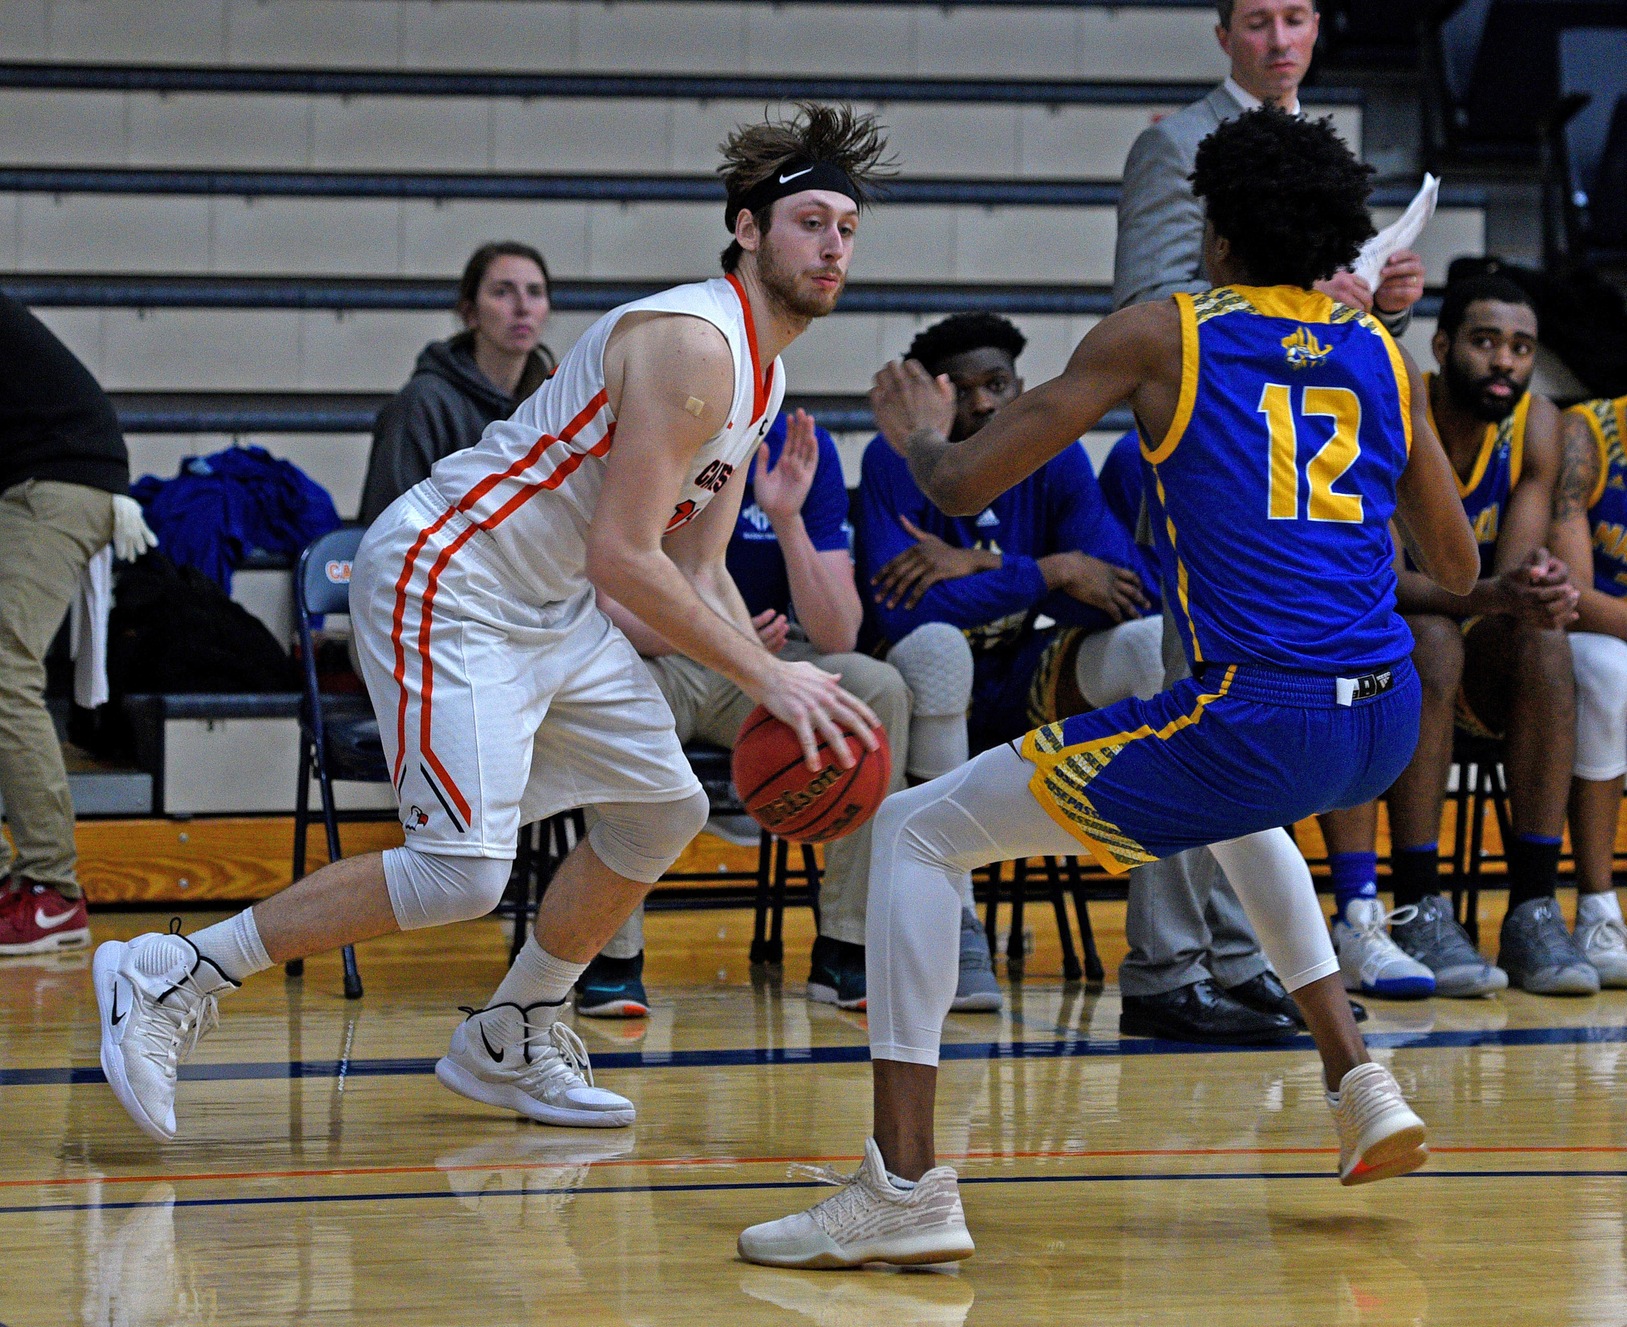 After 19 days, Carson-Newman finally downs Mars Hill 85-73